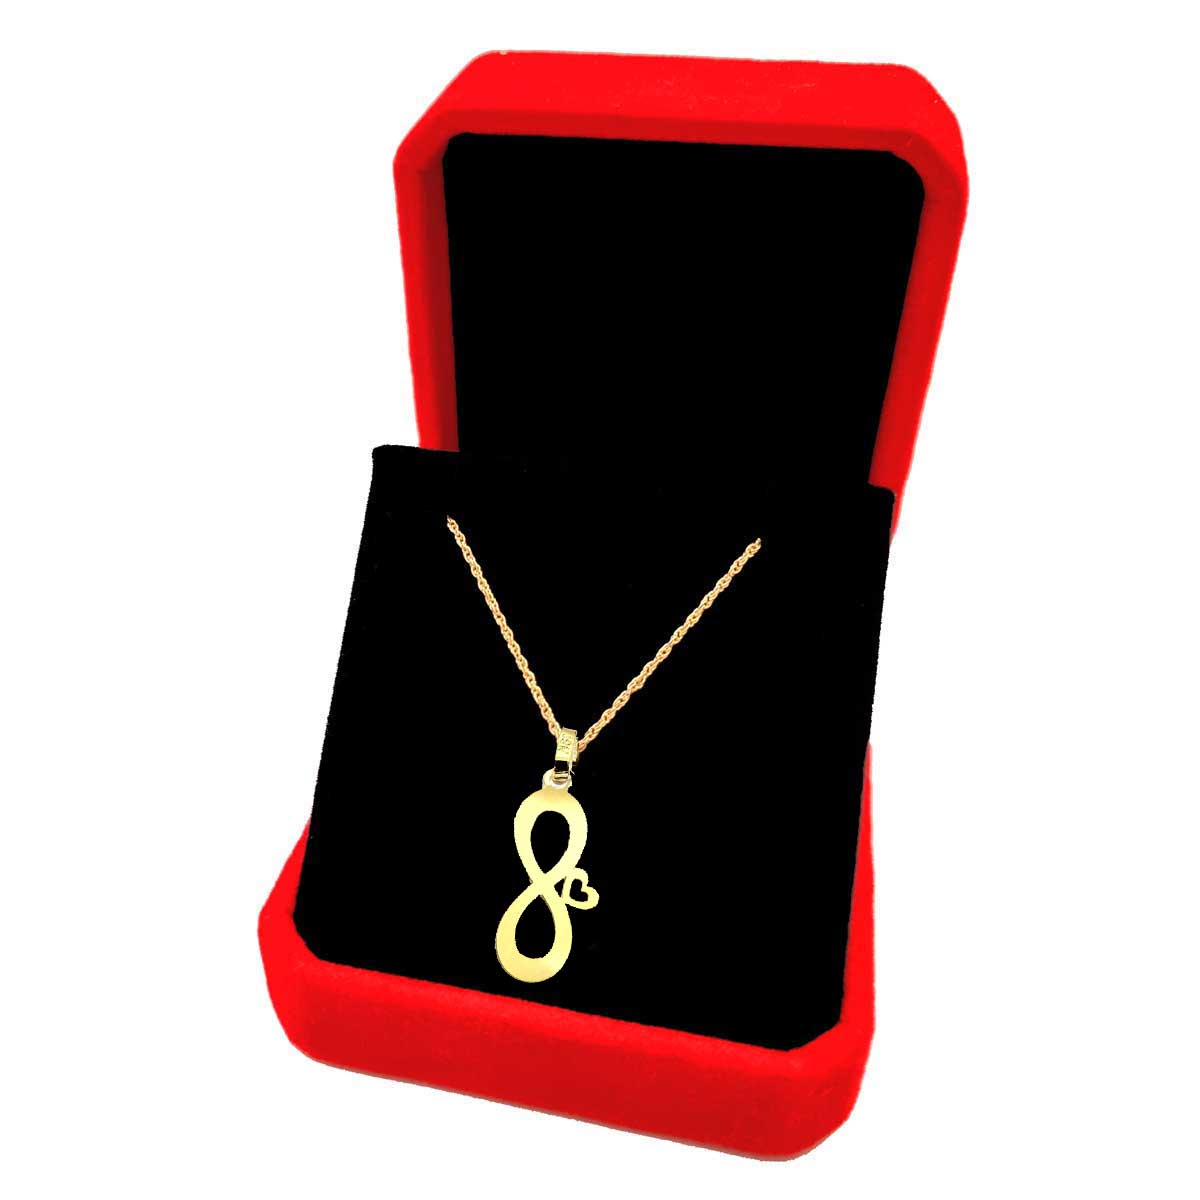 18K Pure Gold Infinity with Heart Design Necklace